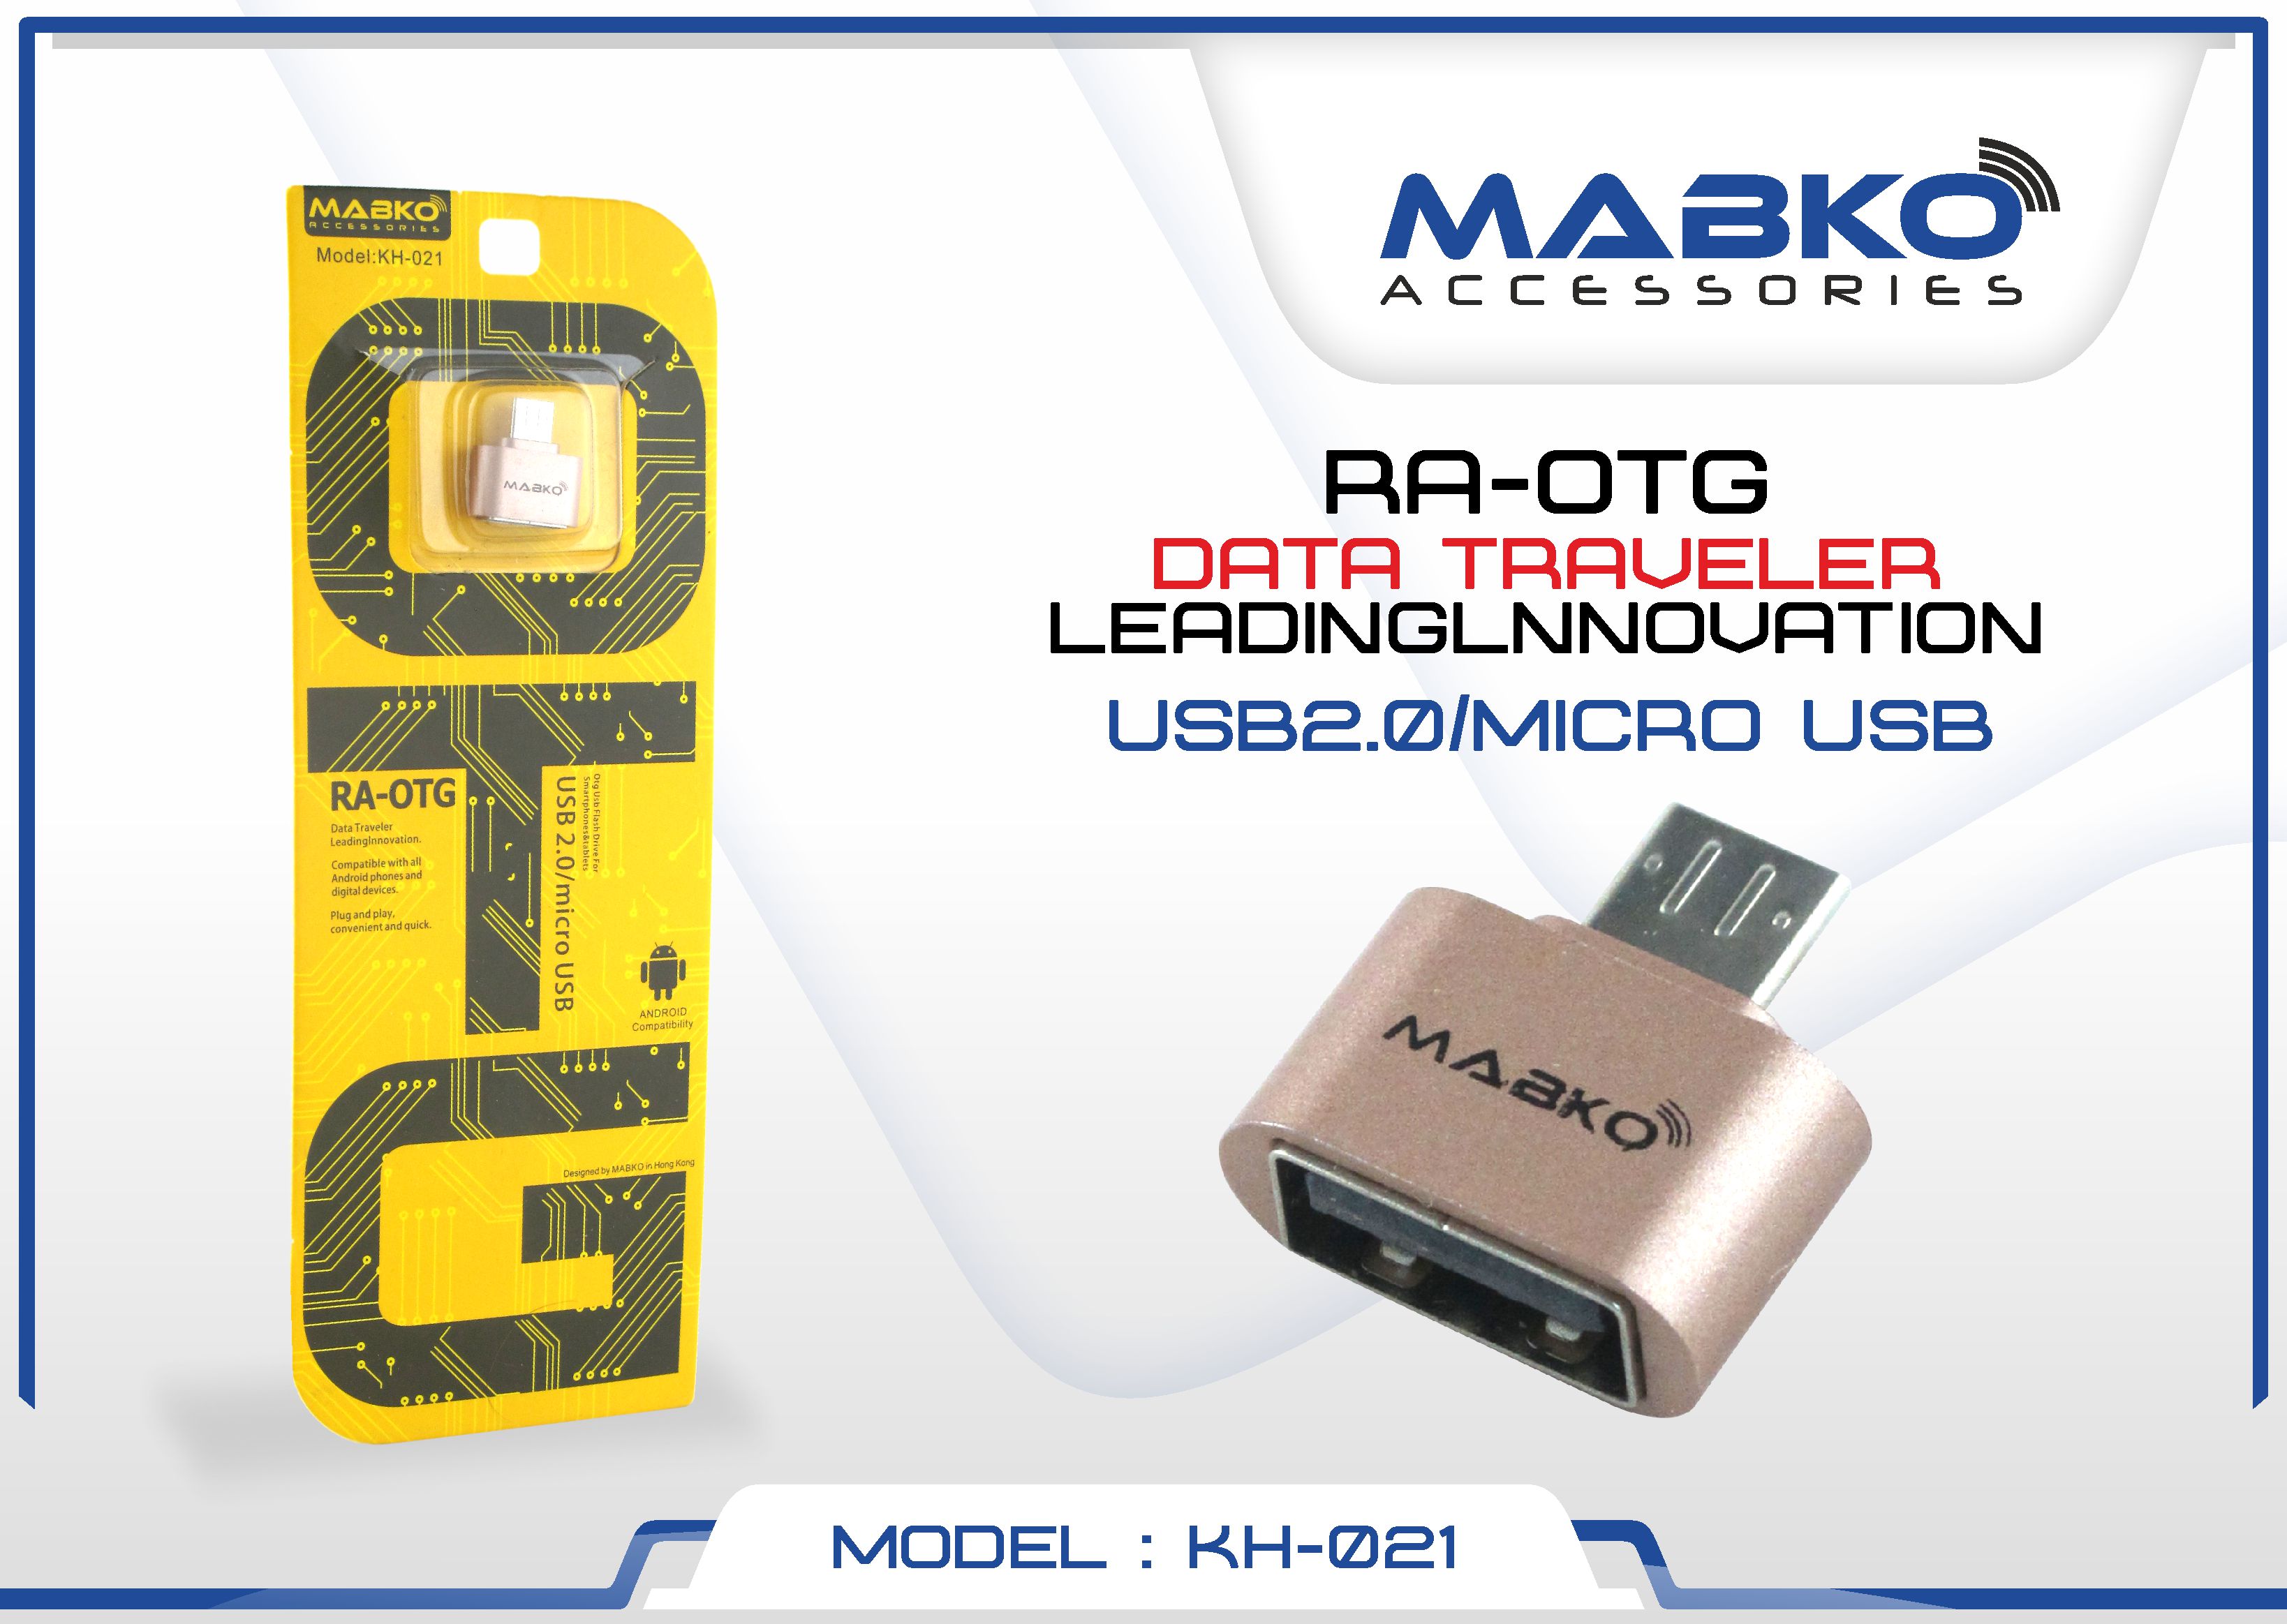 KH-J004 MABKO CHARGER 3.4A